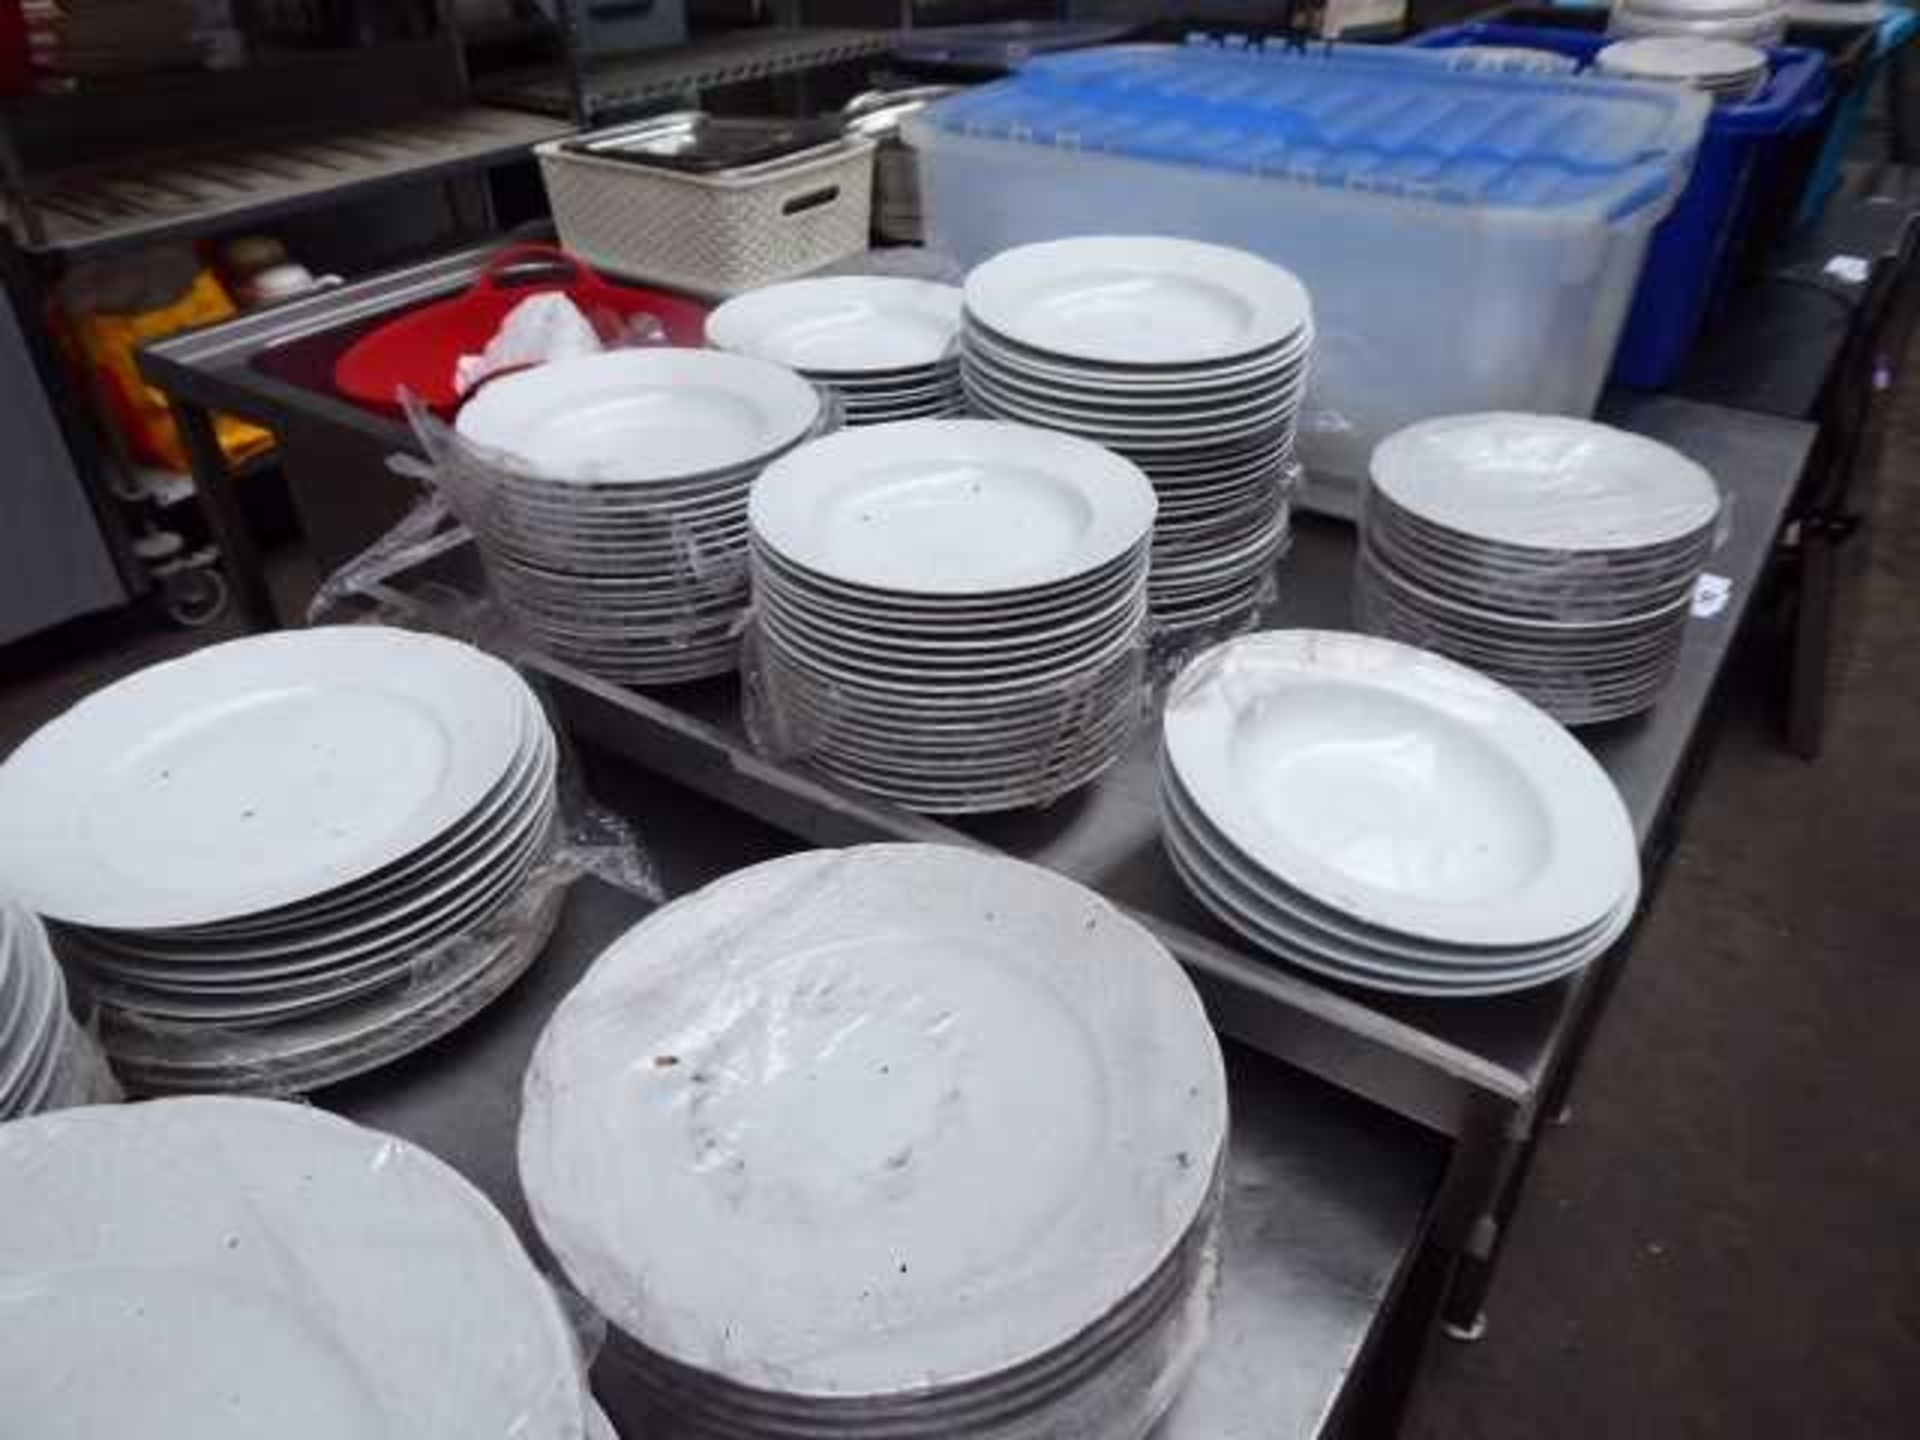 Large quantity of mostly matching crockery including large dinner plates, regular dinner plates, - Image 2 of 4